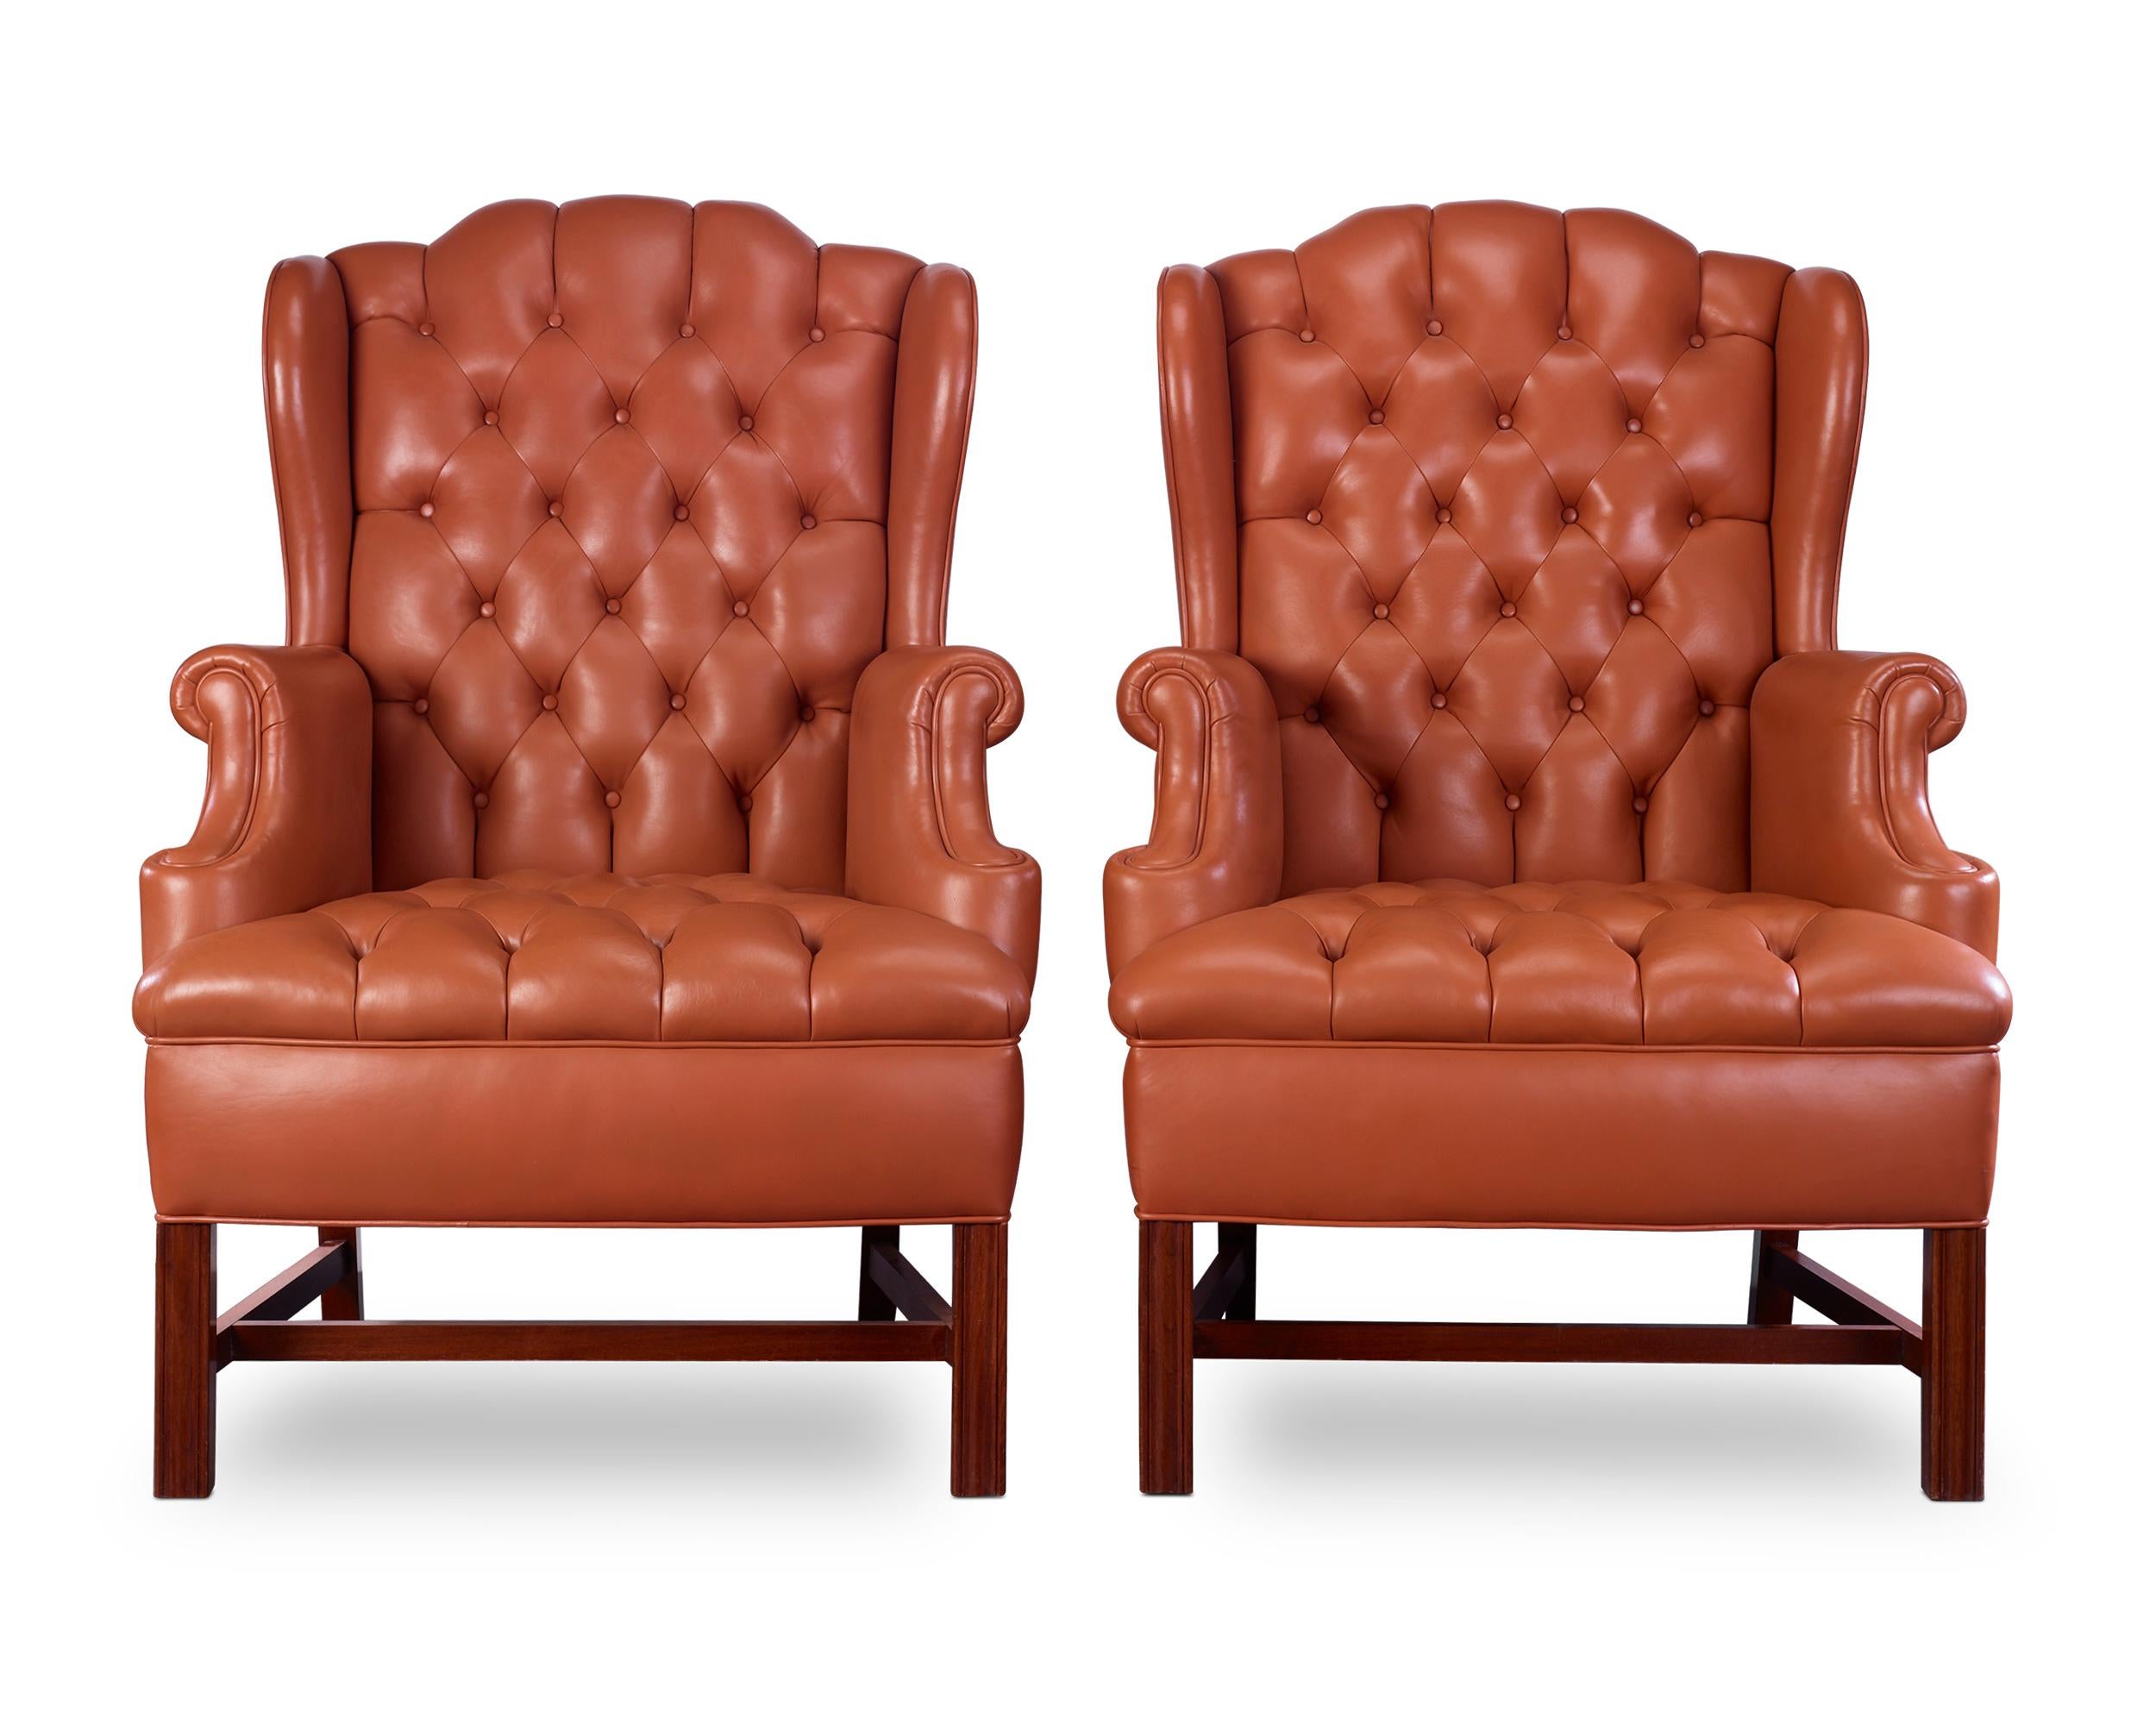 The ultimate in luxury, this pair of George III-style tufted leather chairs with matching ottomans provide comfort while maintaining aesthetic appeal. Beautifully proportioned and upholstered in handsome tobacco-colored leather, this set exudes all